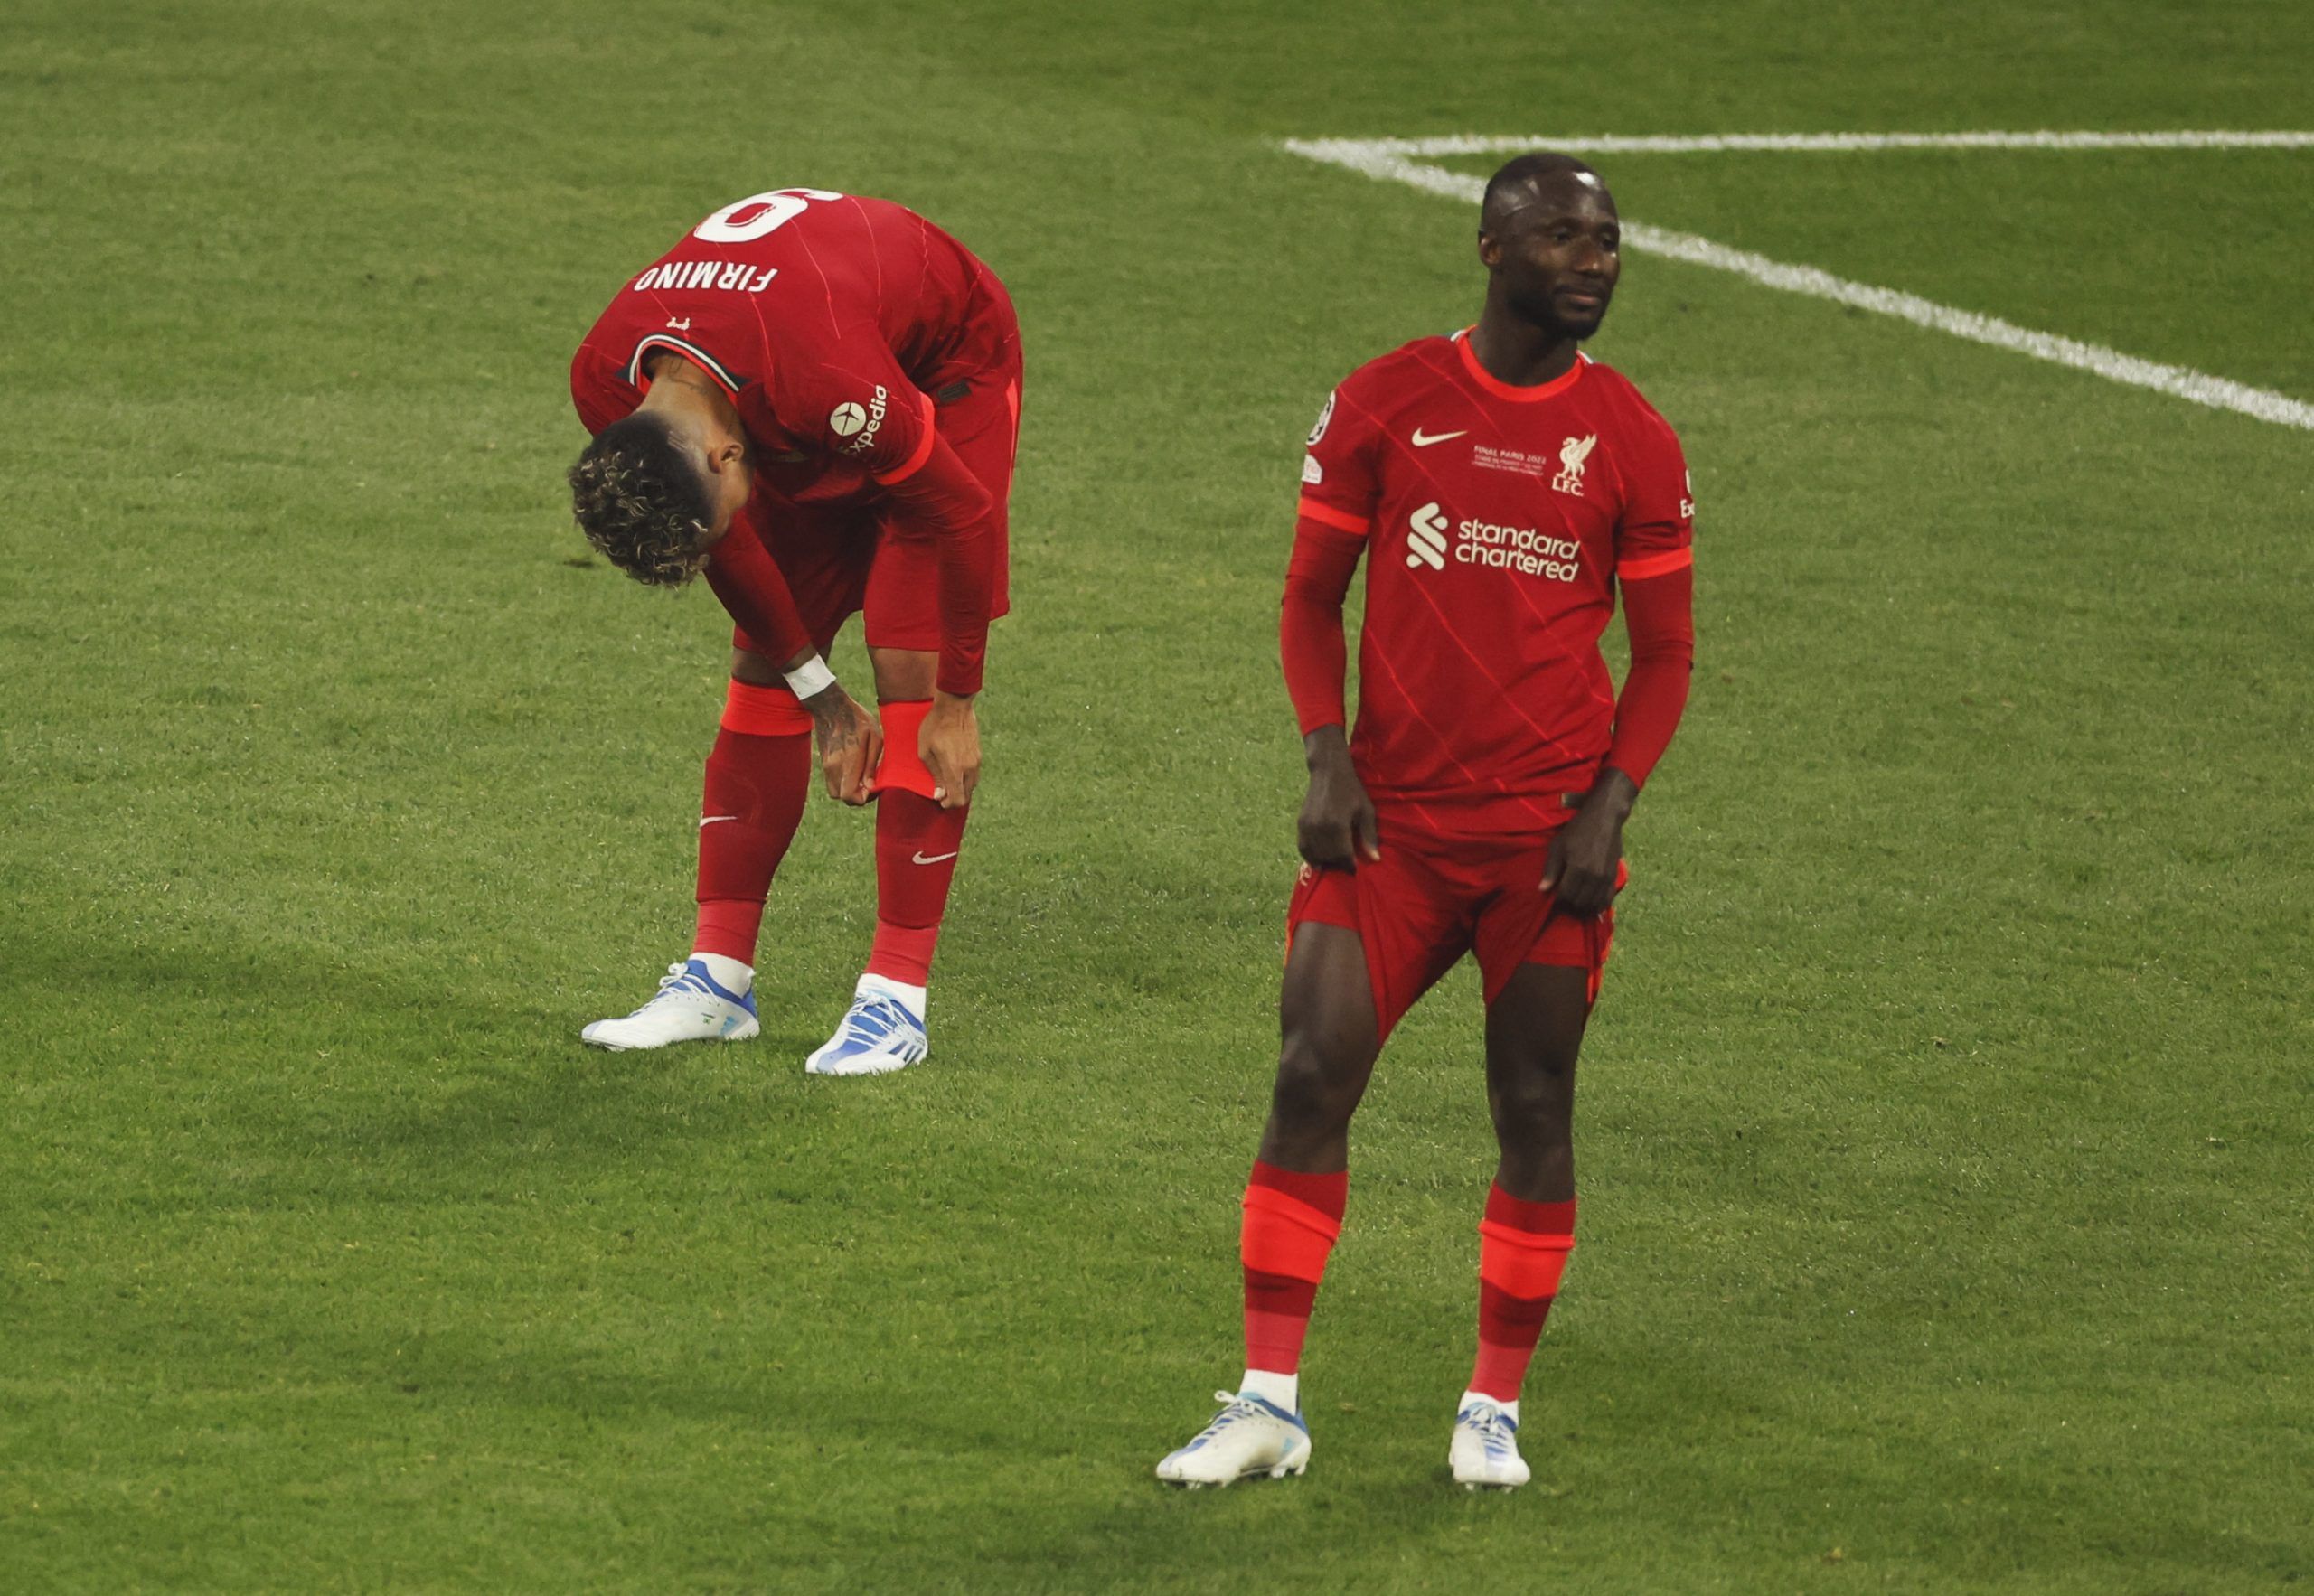 Soccer Football - Champions League Final - Liverpool v Real Madrid - Stade de France, Saint-Denis near Paris, France - May 28, 2022  Liverpool's Roberto Firmino and Naby Keita look dejected after losing the Champions League final REUTERS/Gonzalo Fuentes